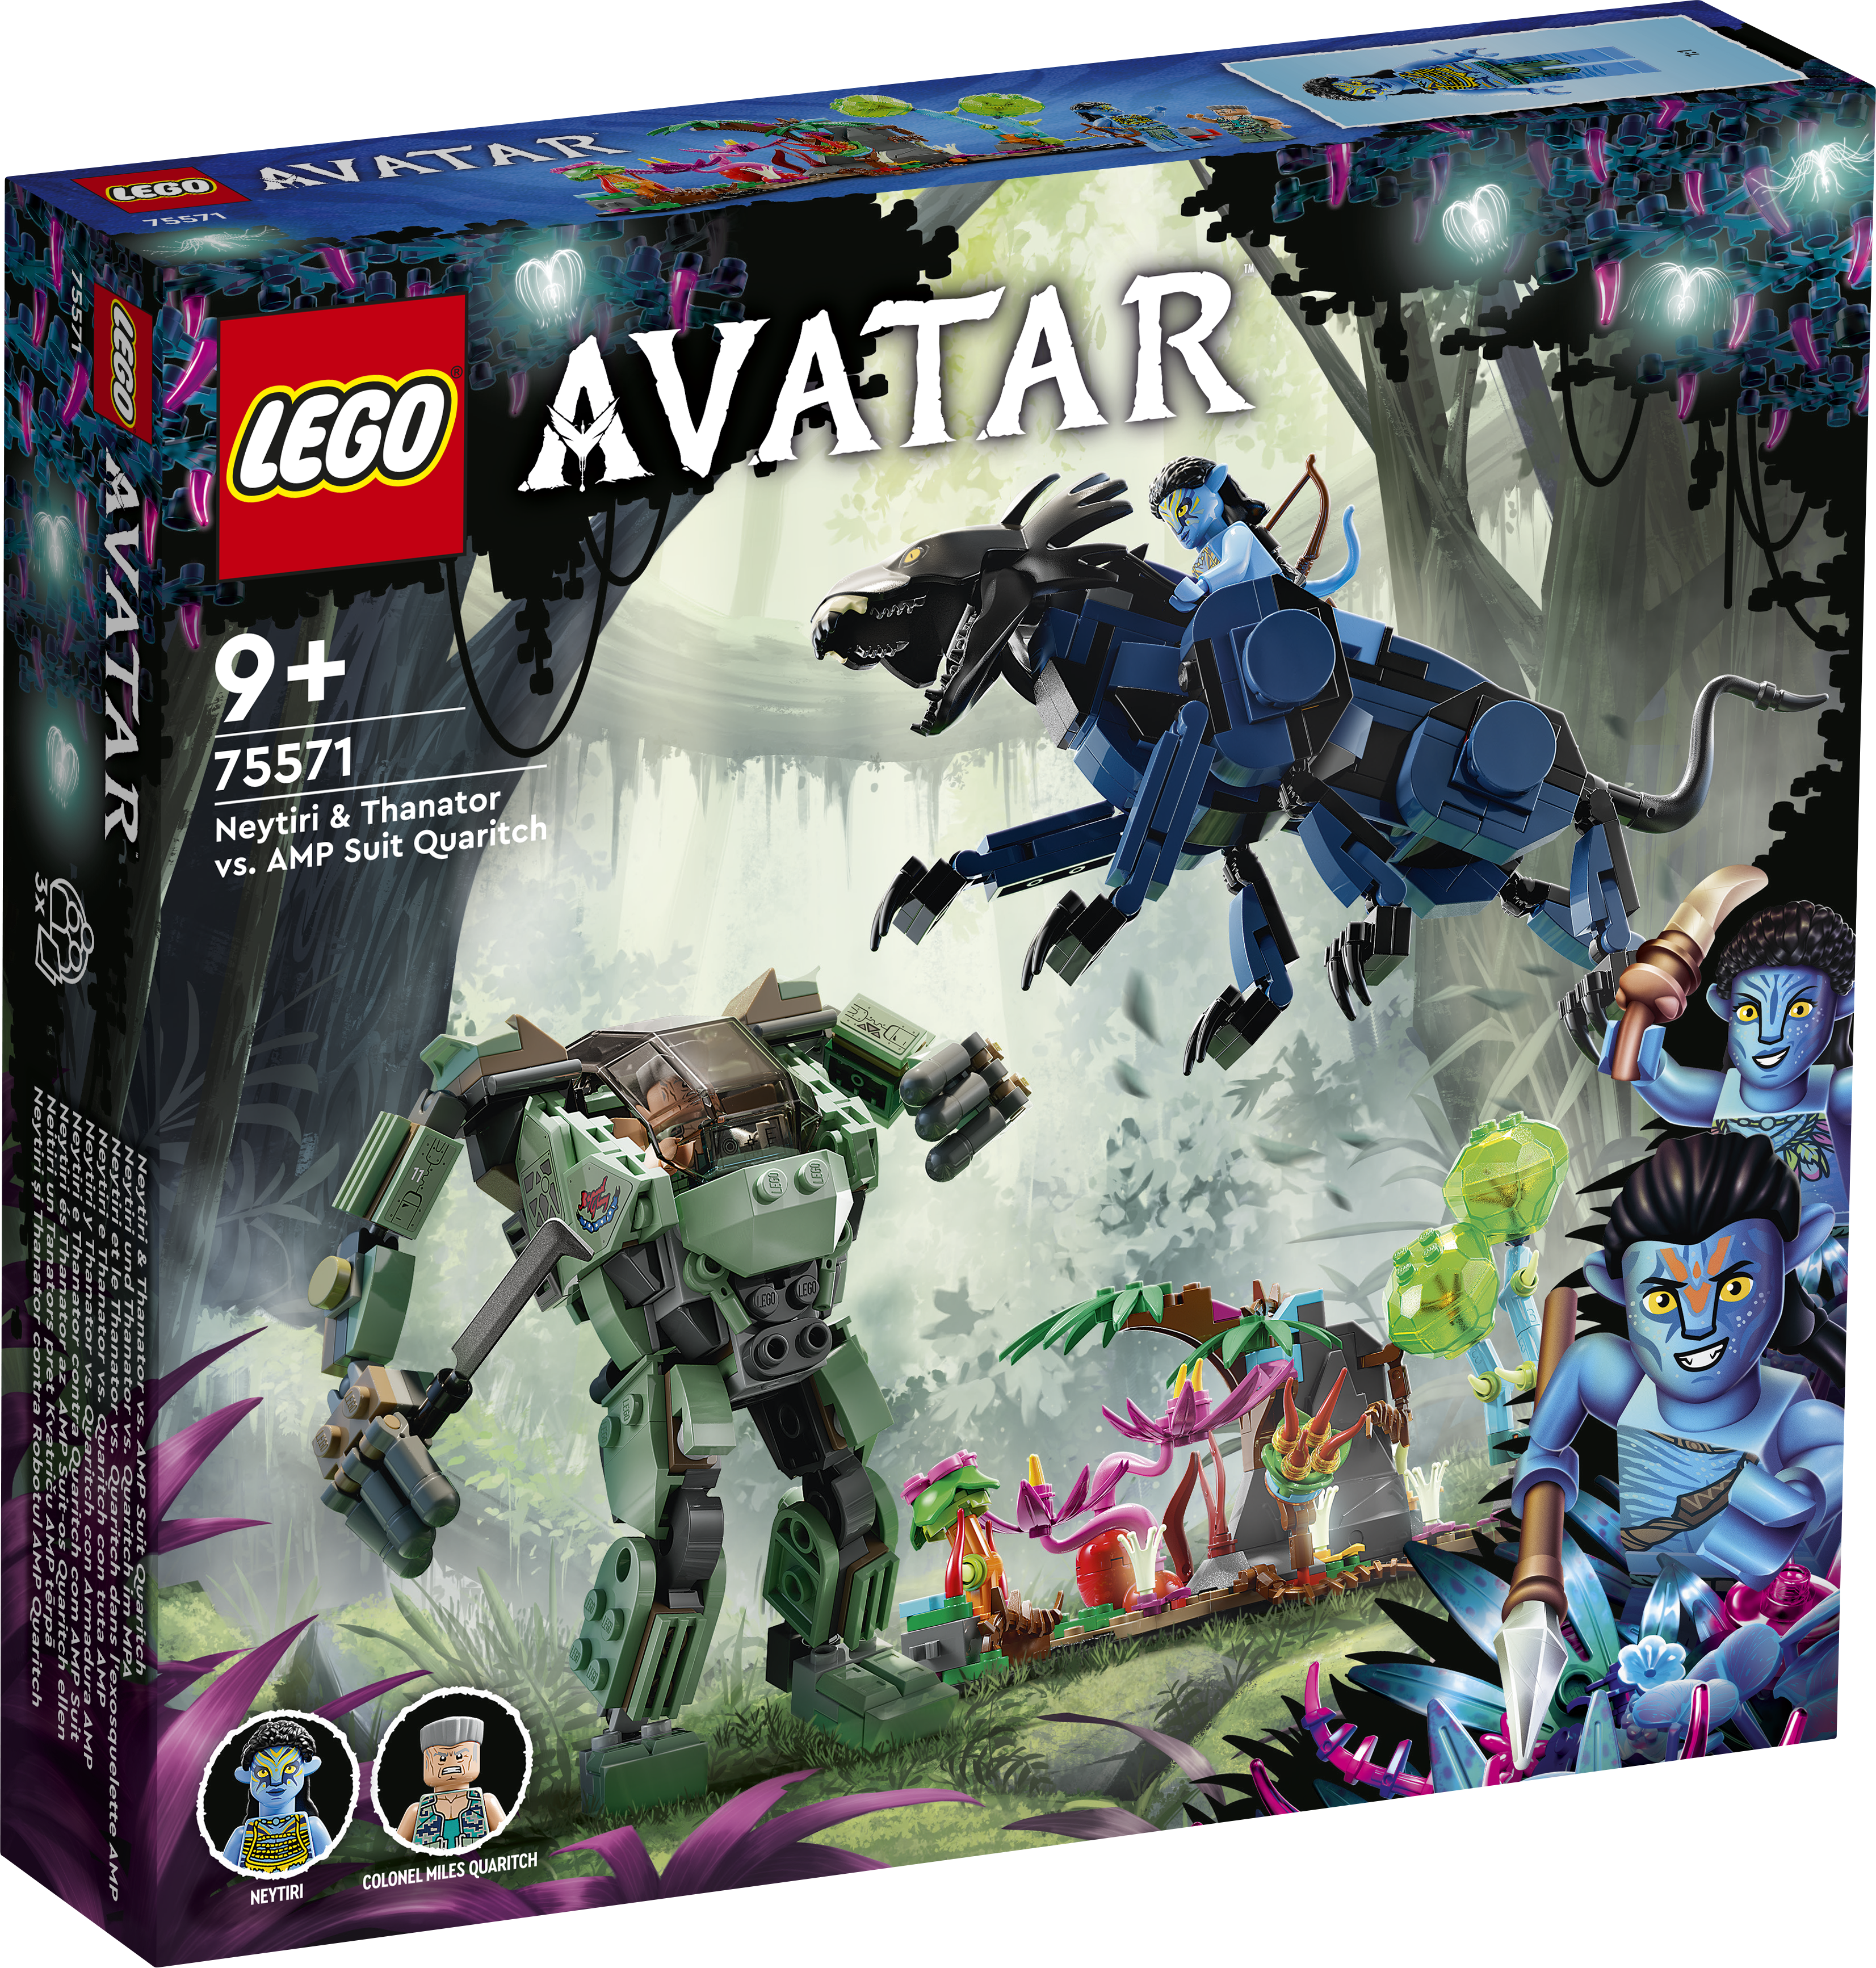 LEGO Group unveils four new sets inspired by Avatar at San Diego Comic Con 2022 - Us - LEGO.com